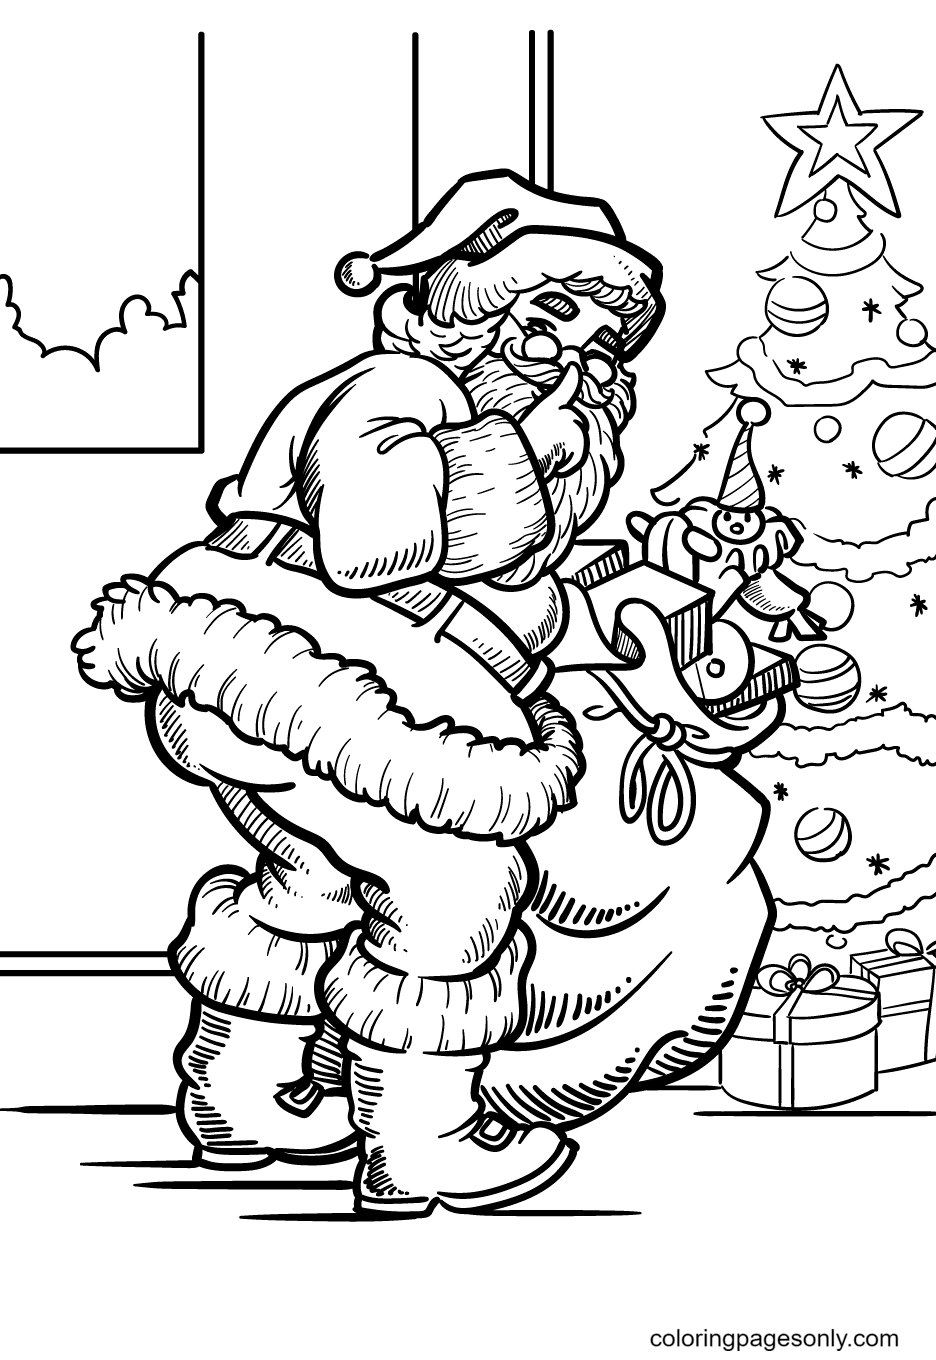 Santa Claus Sneaky out to Deliver Gifts Coloring Page